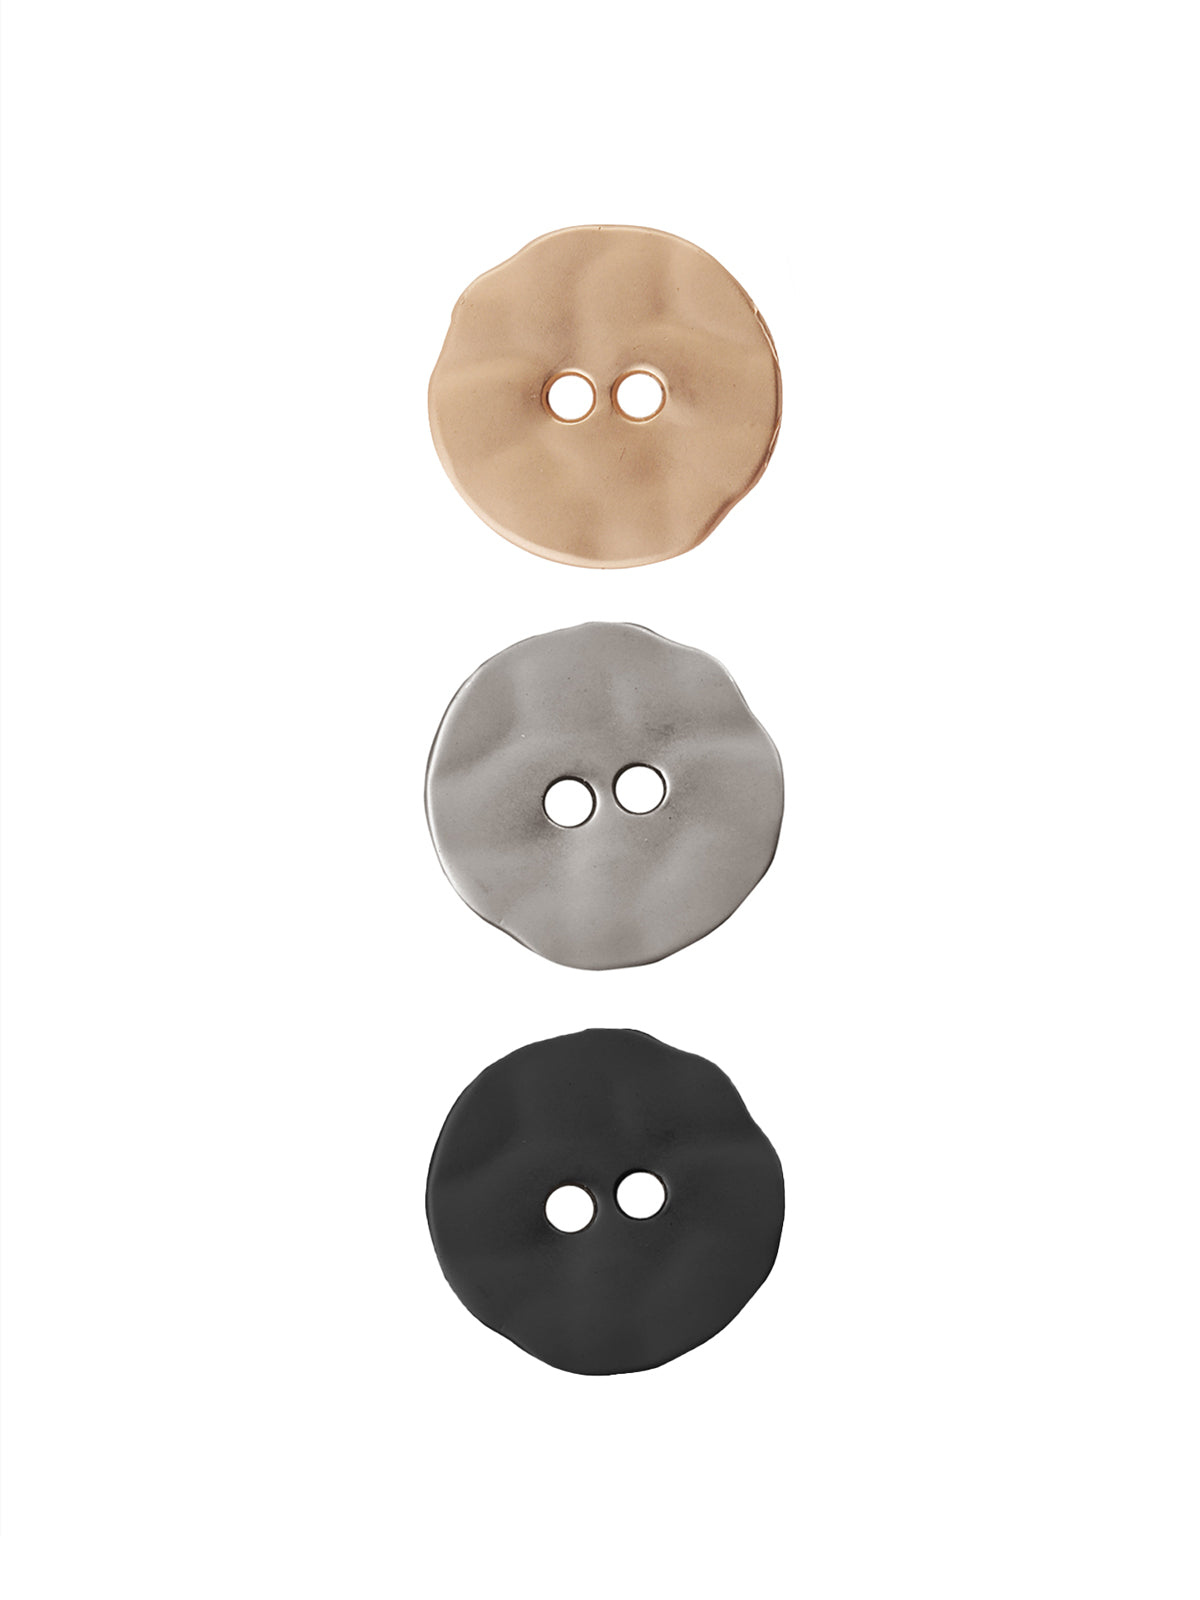 Silver Buttons - buy online »